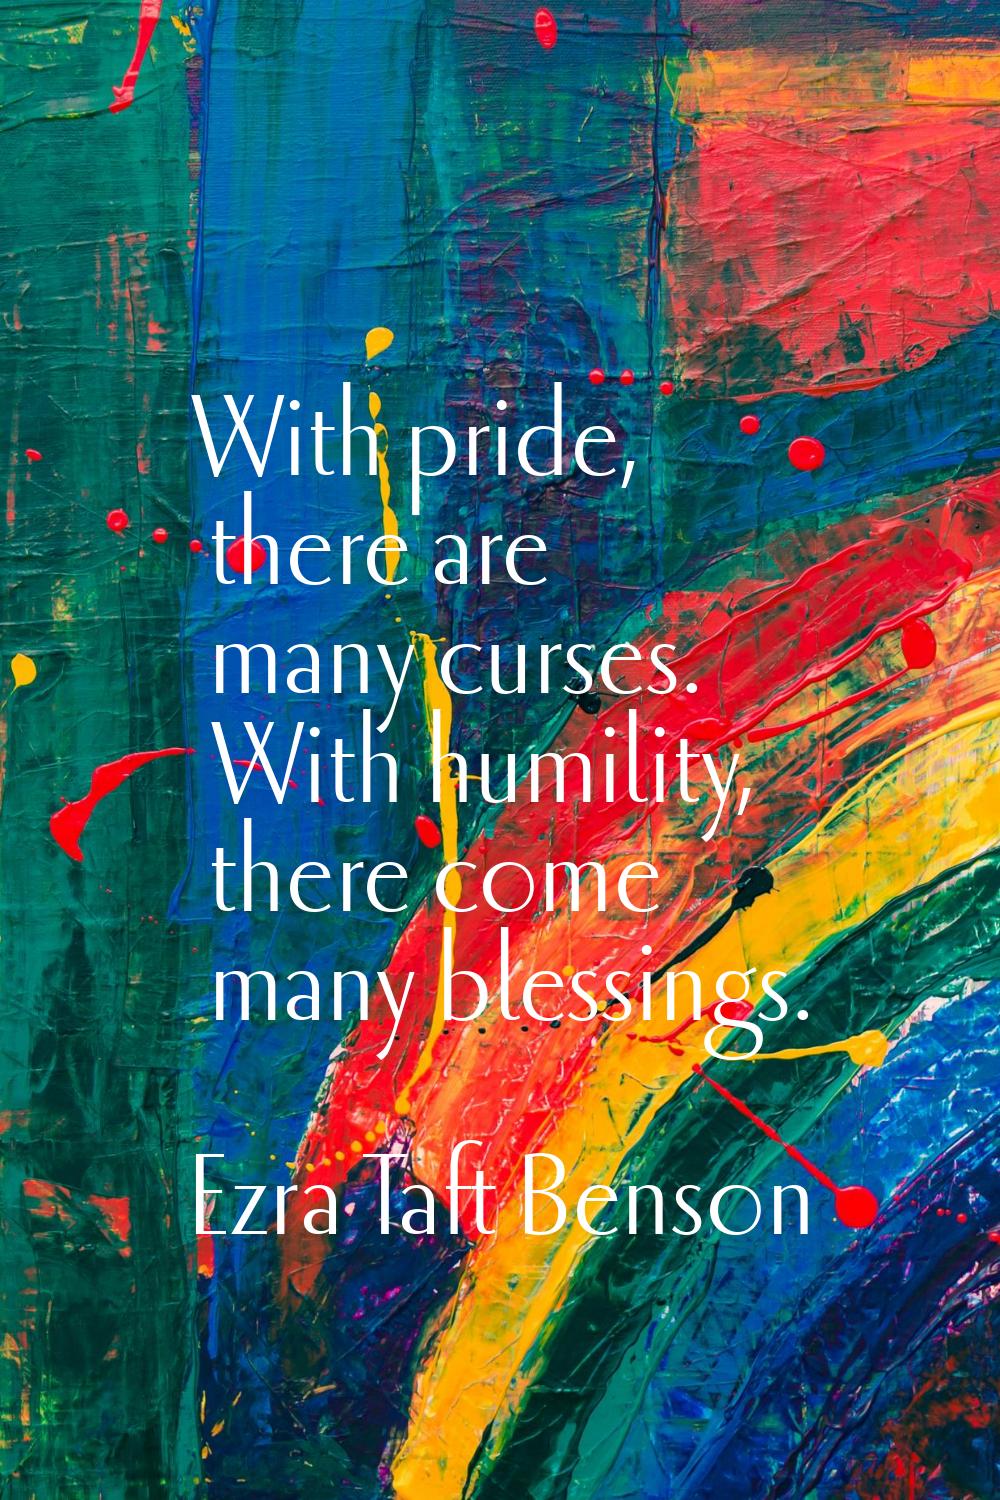 With pride, there are many curses. With humility, there come many blessings.